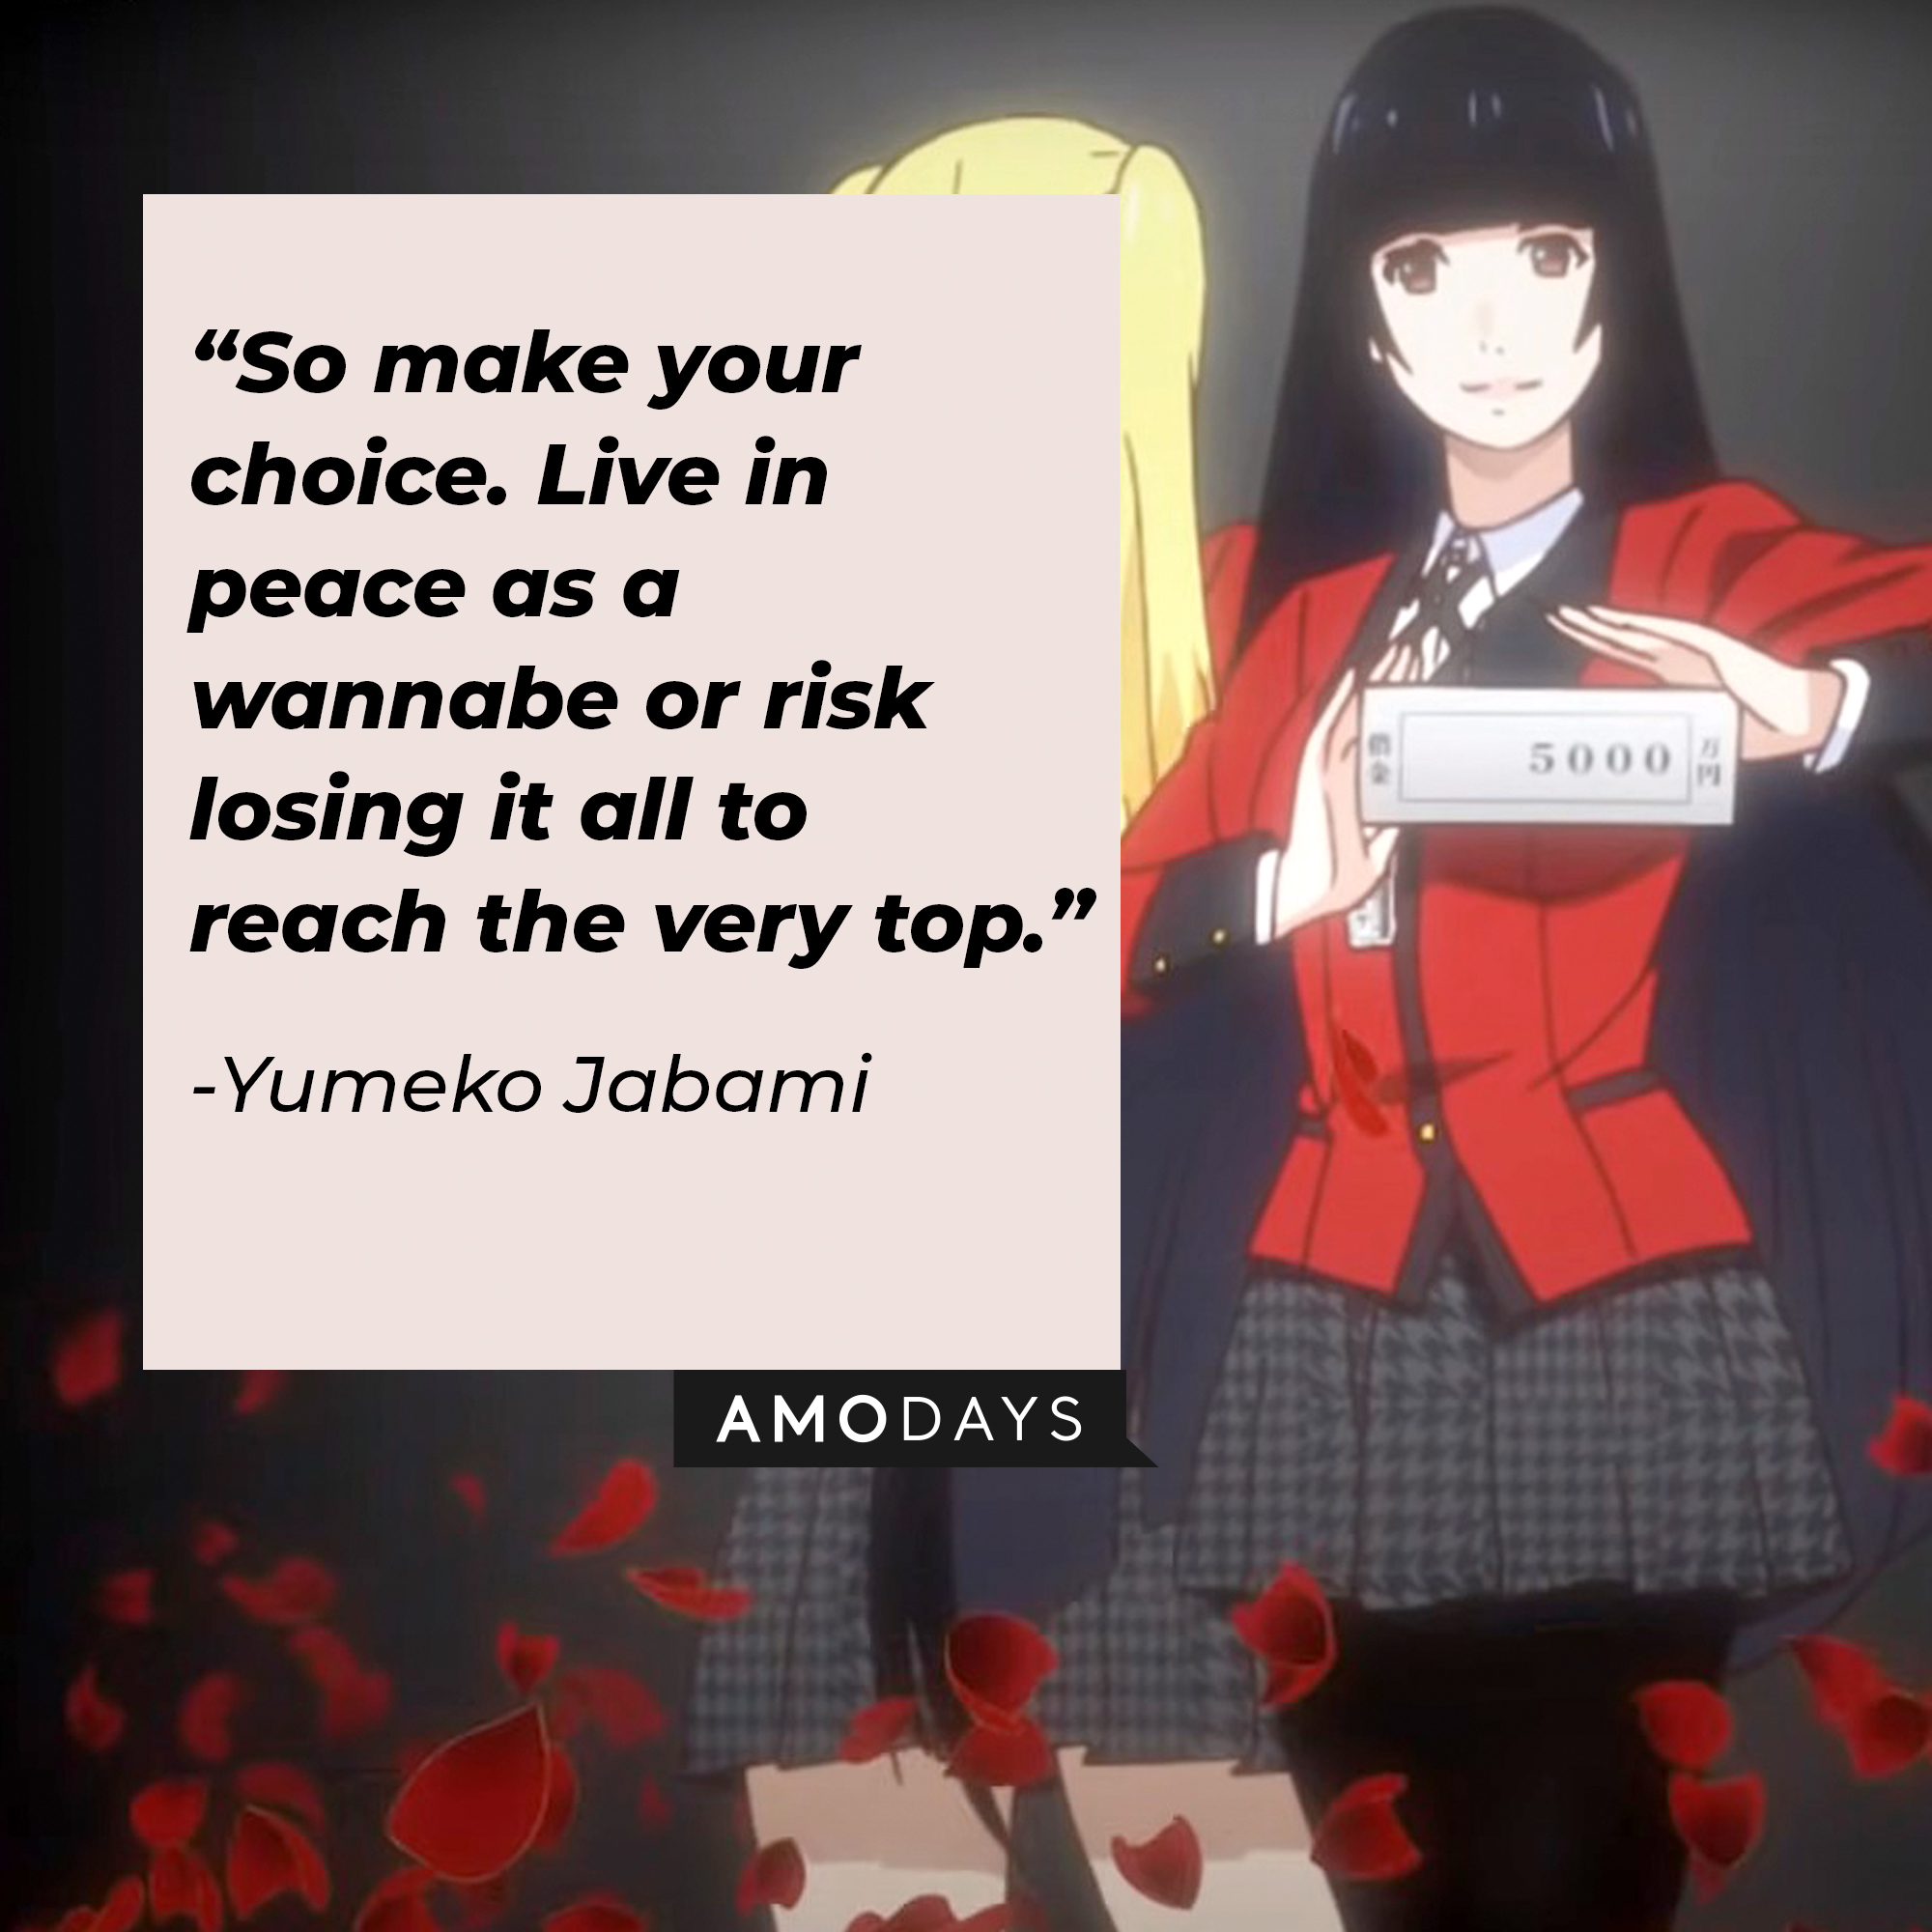 A picture of Yumeko Jabami with her quote:  “So make your choice. Live in peace as a wannabe or risk losing it all to reach the very top.” | Source: youtube.com/netflixanime